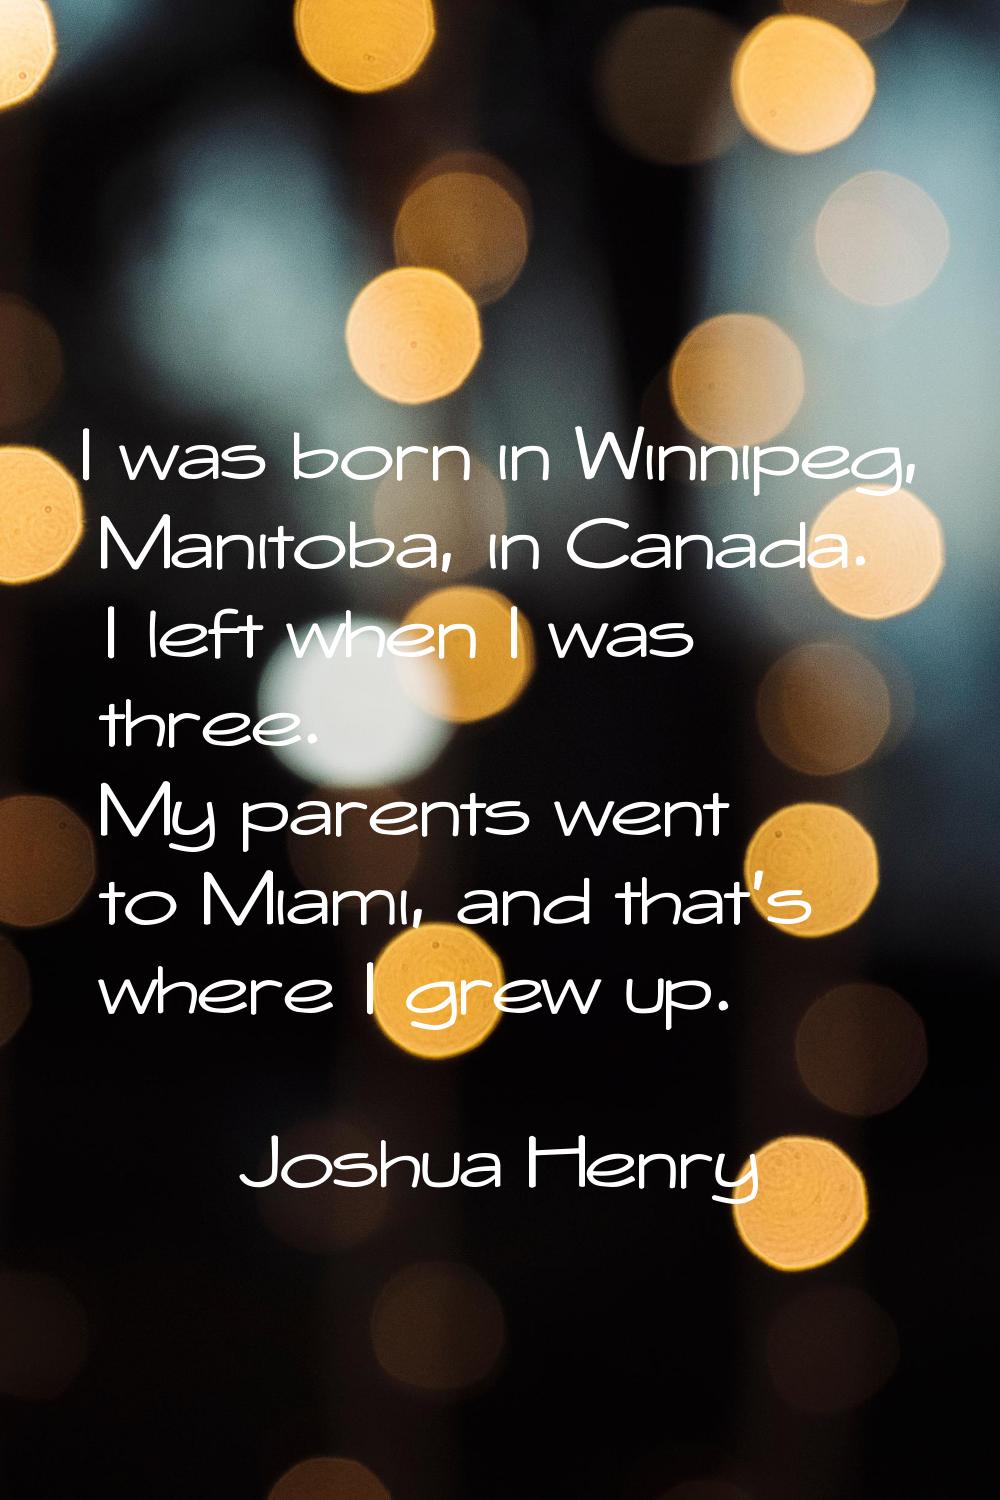 I was born in Winnipeg, Manitoba, in Canada. I left when I was three. My parents went to Miami, and